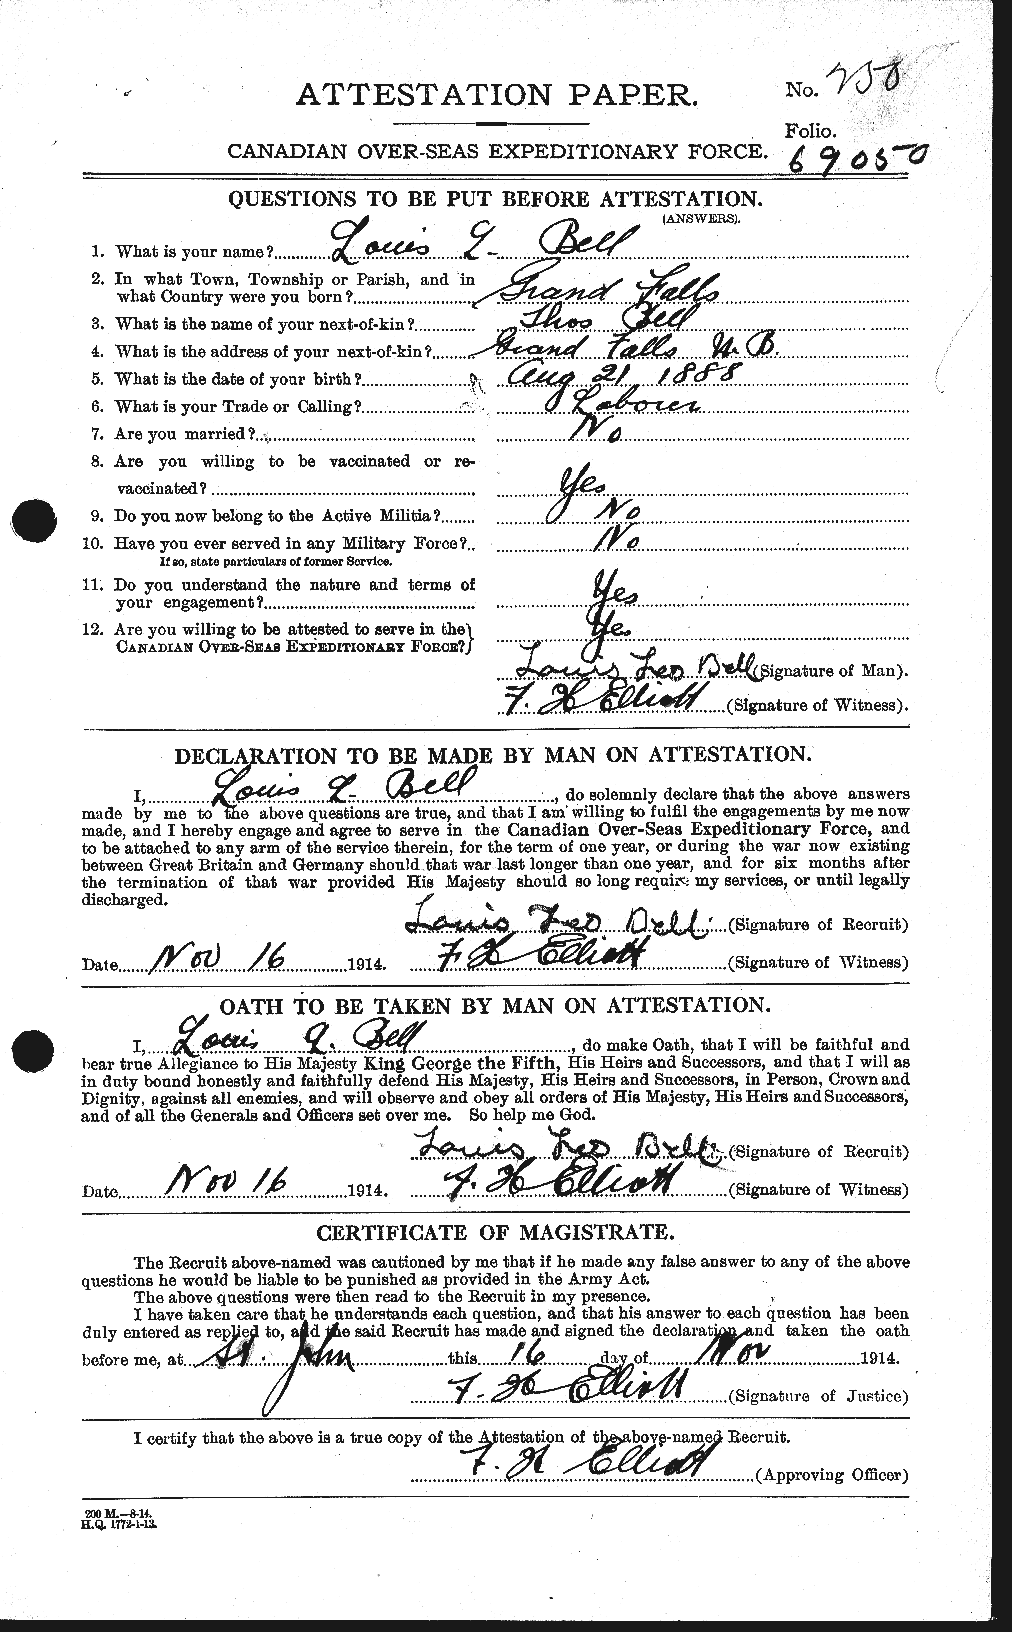 Personnel Records of the First World War - CEF 234532a